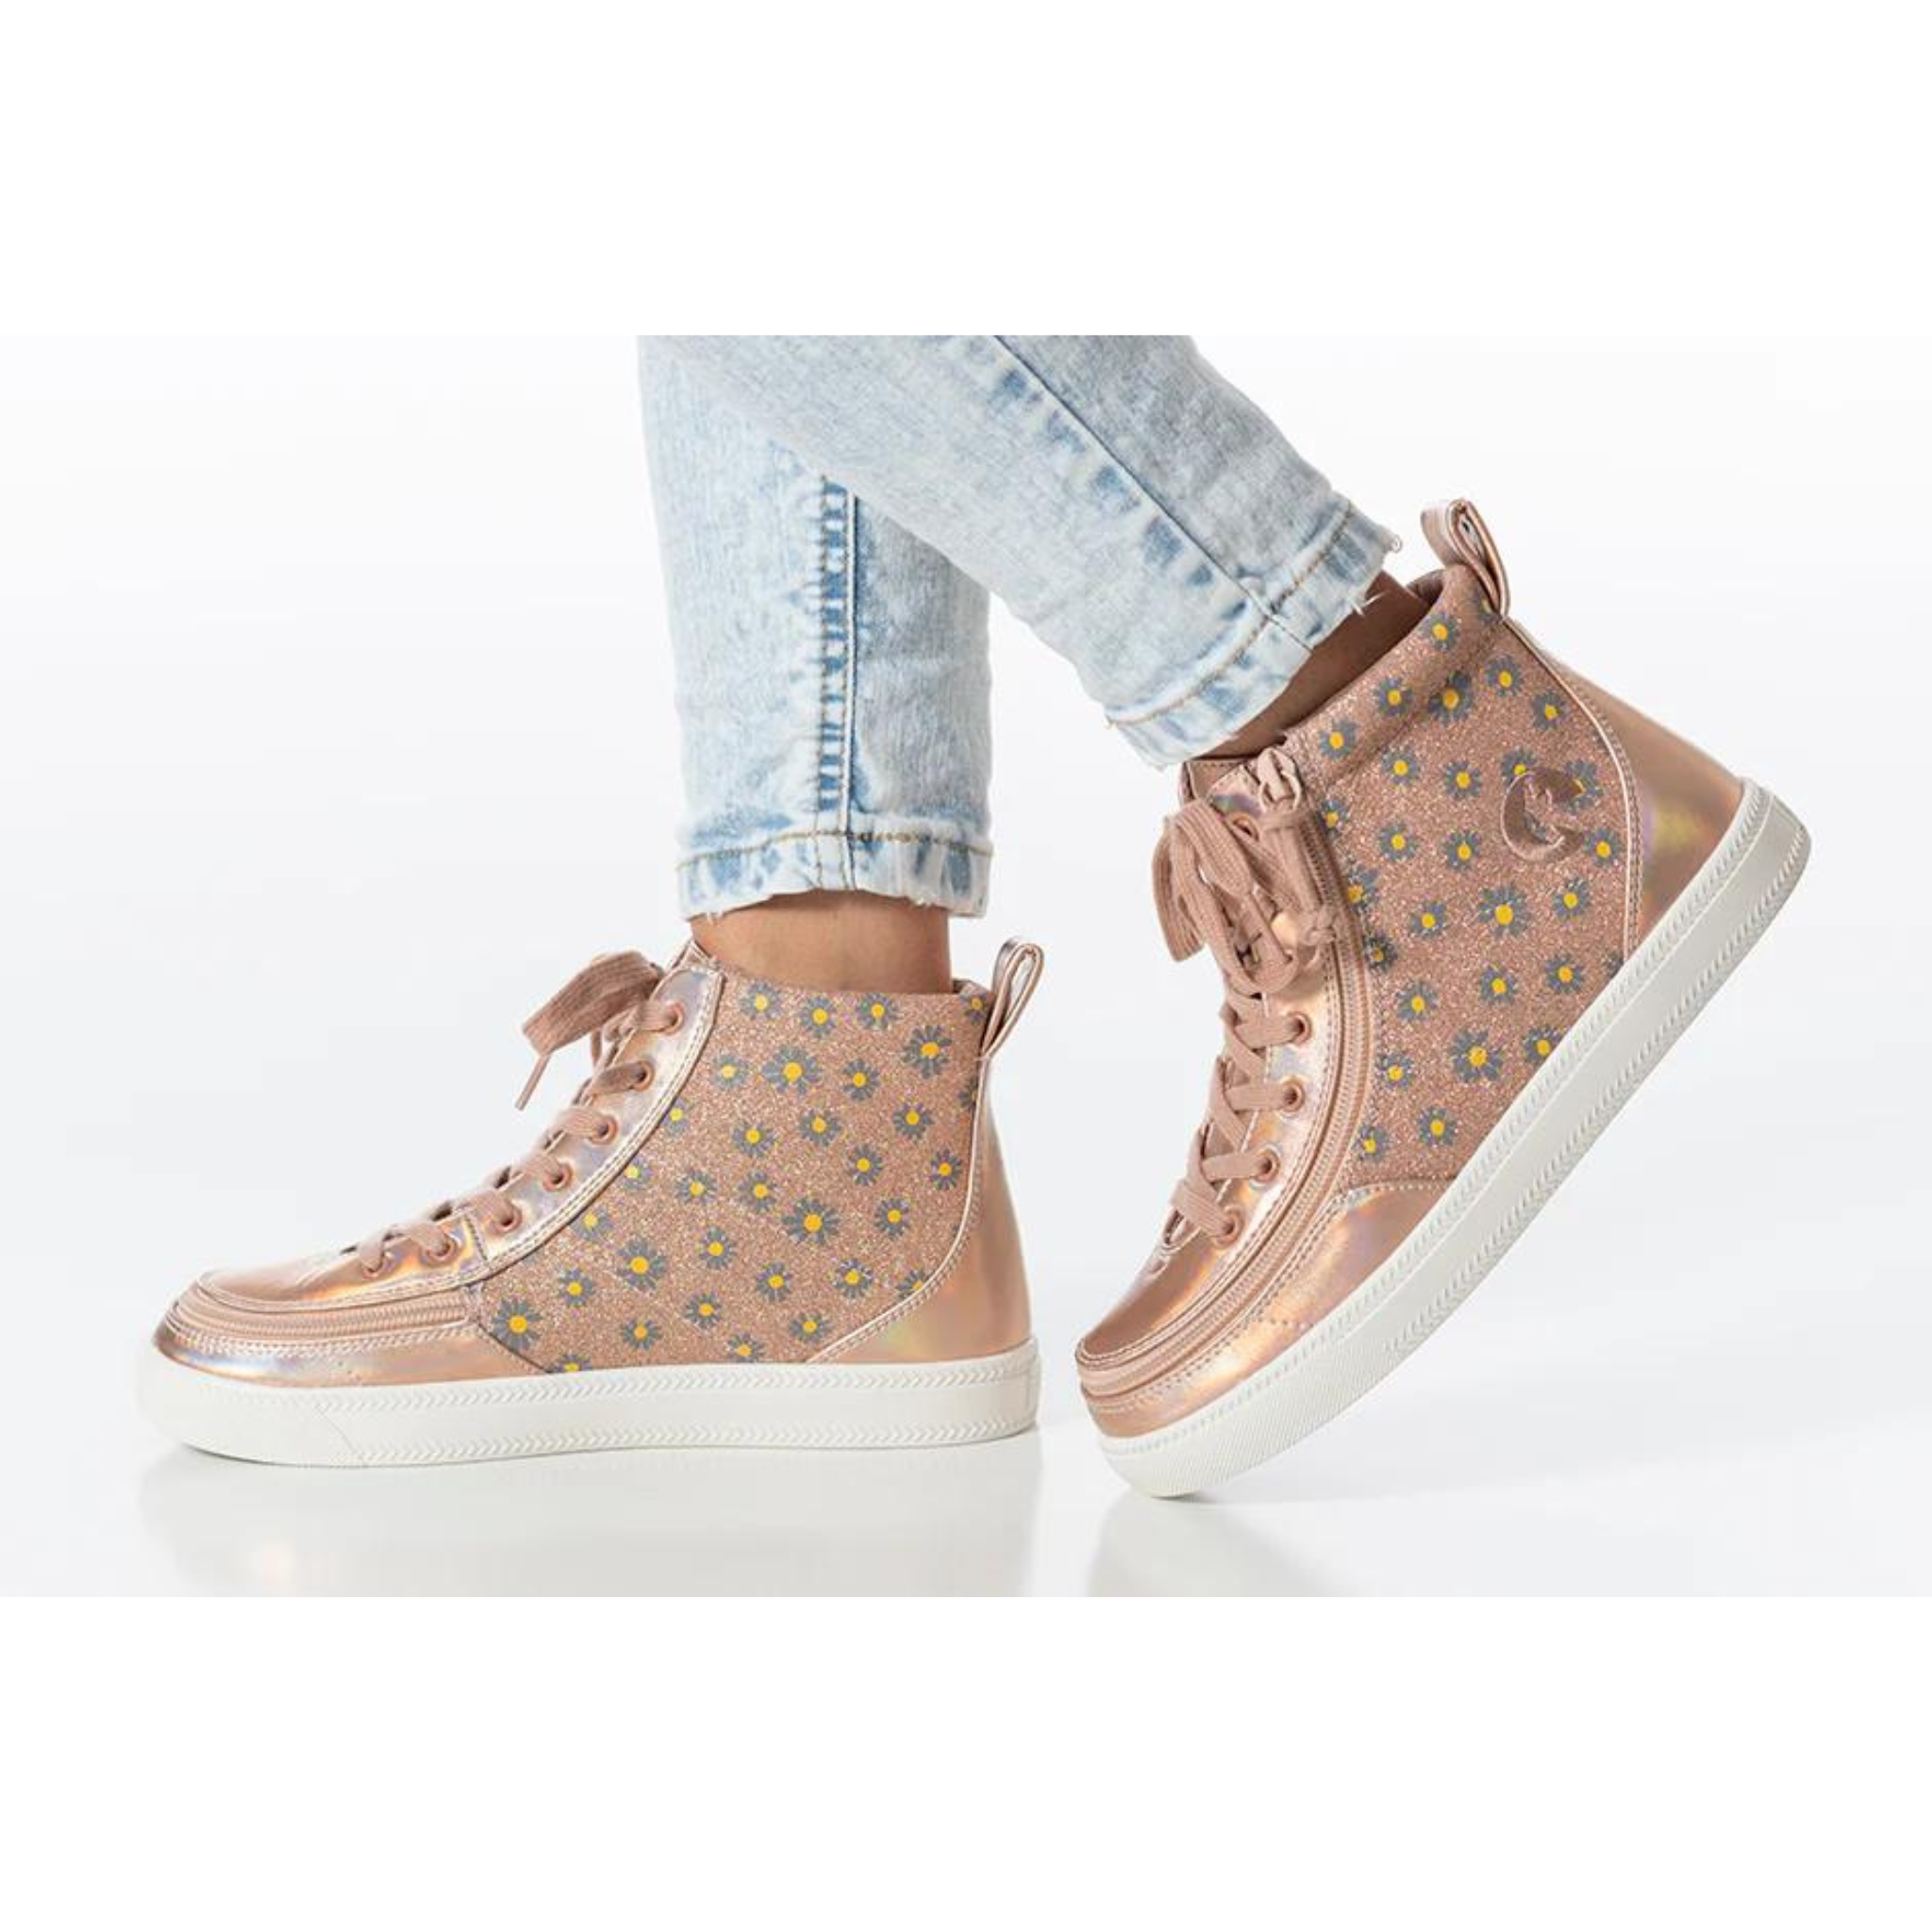 Billy Footwear (Toddlers) - High Top Rose Gold Daisy Faux Leather Shoes